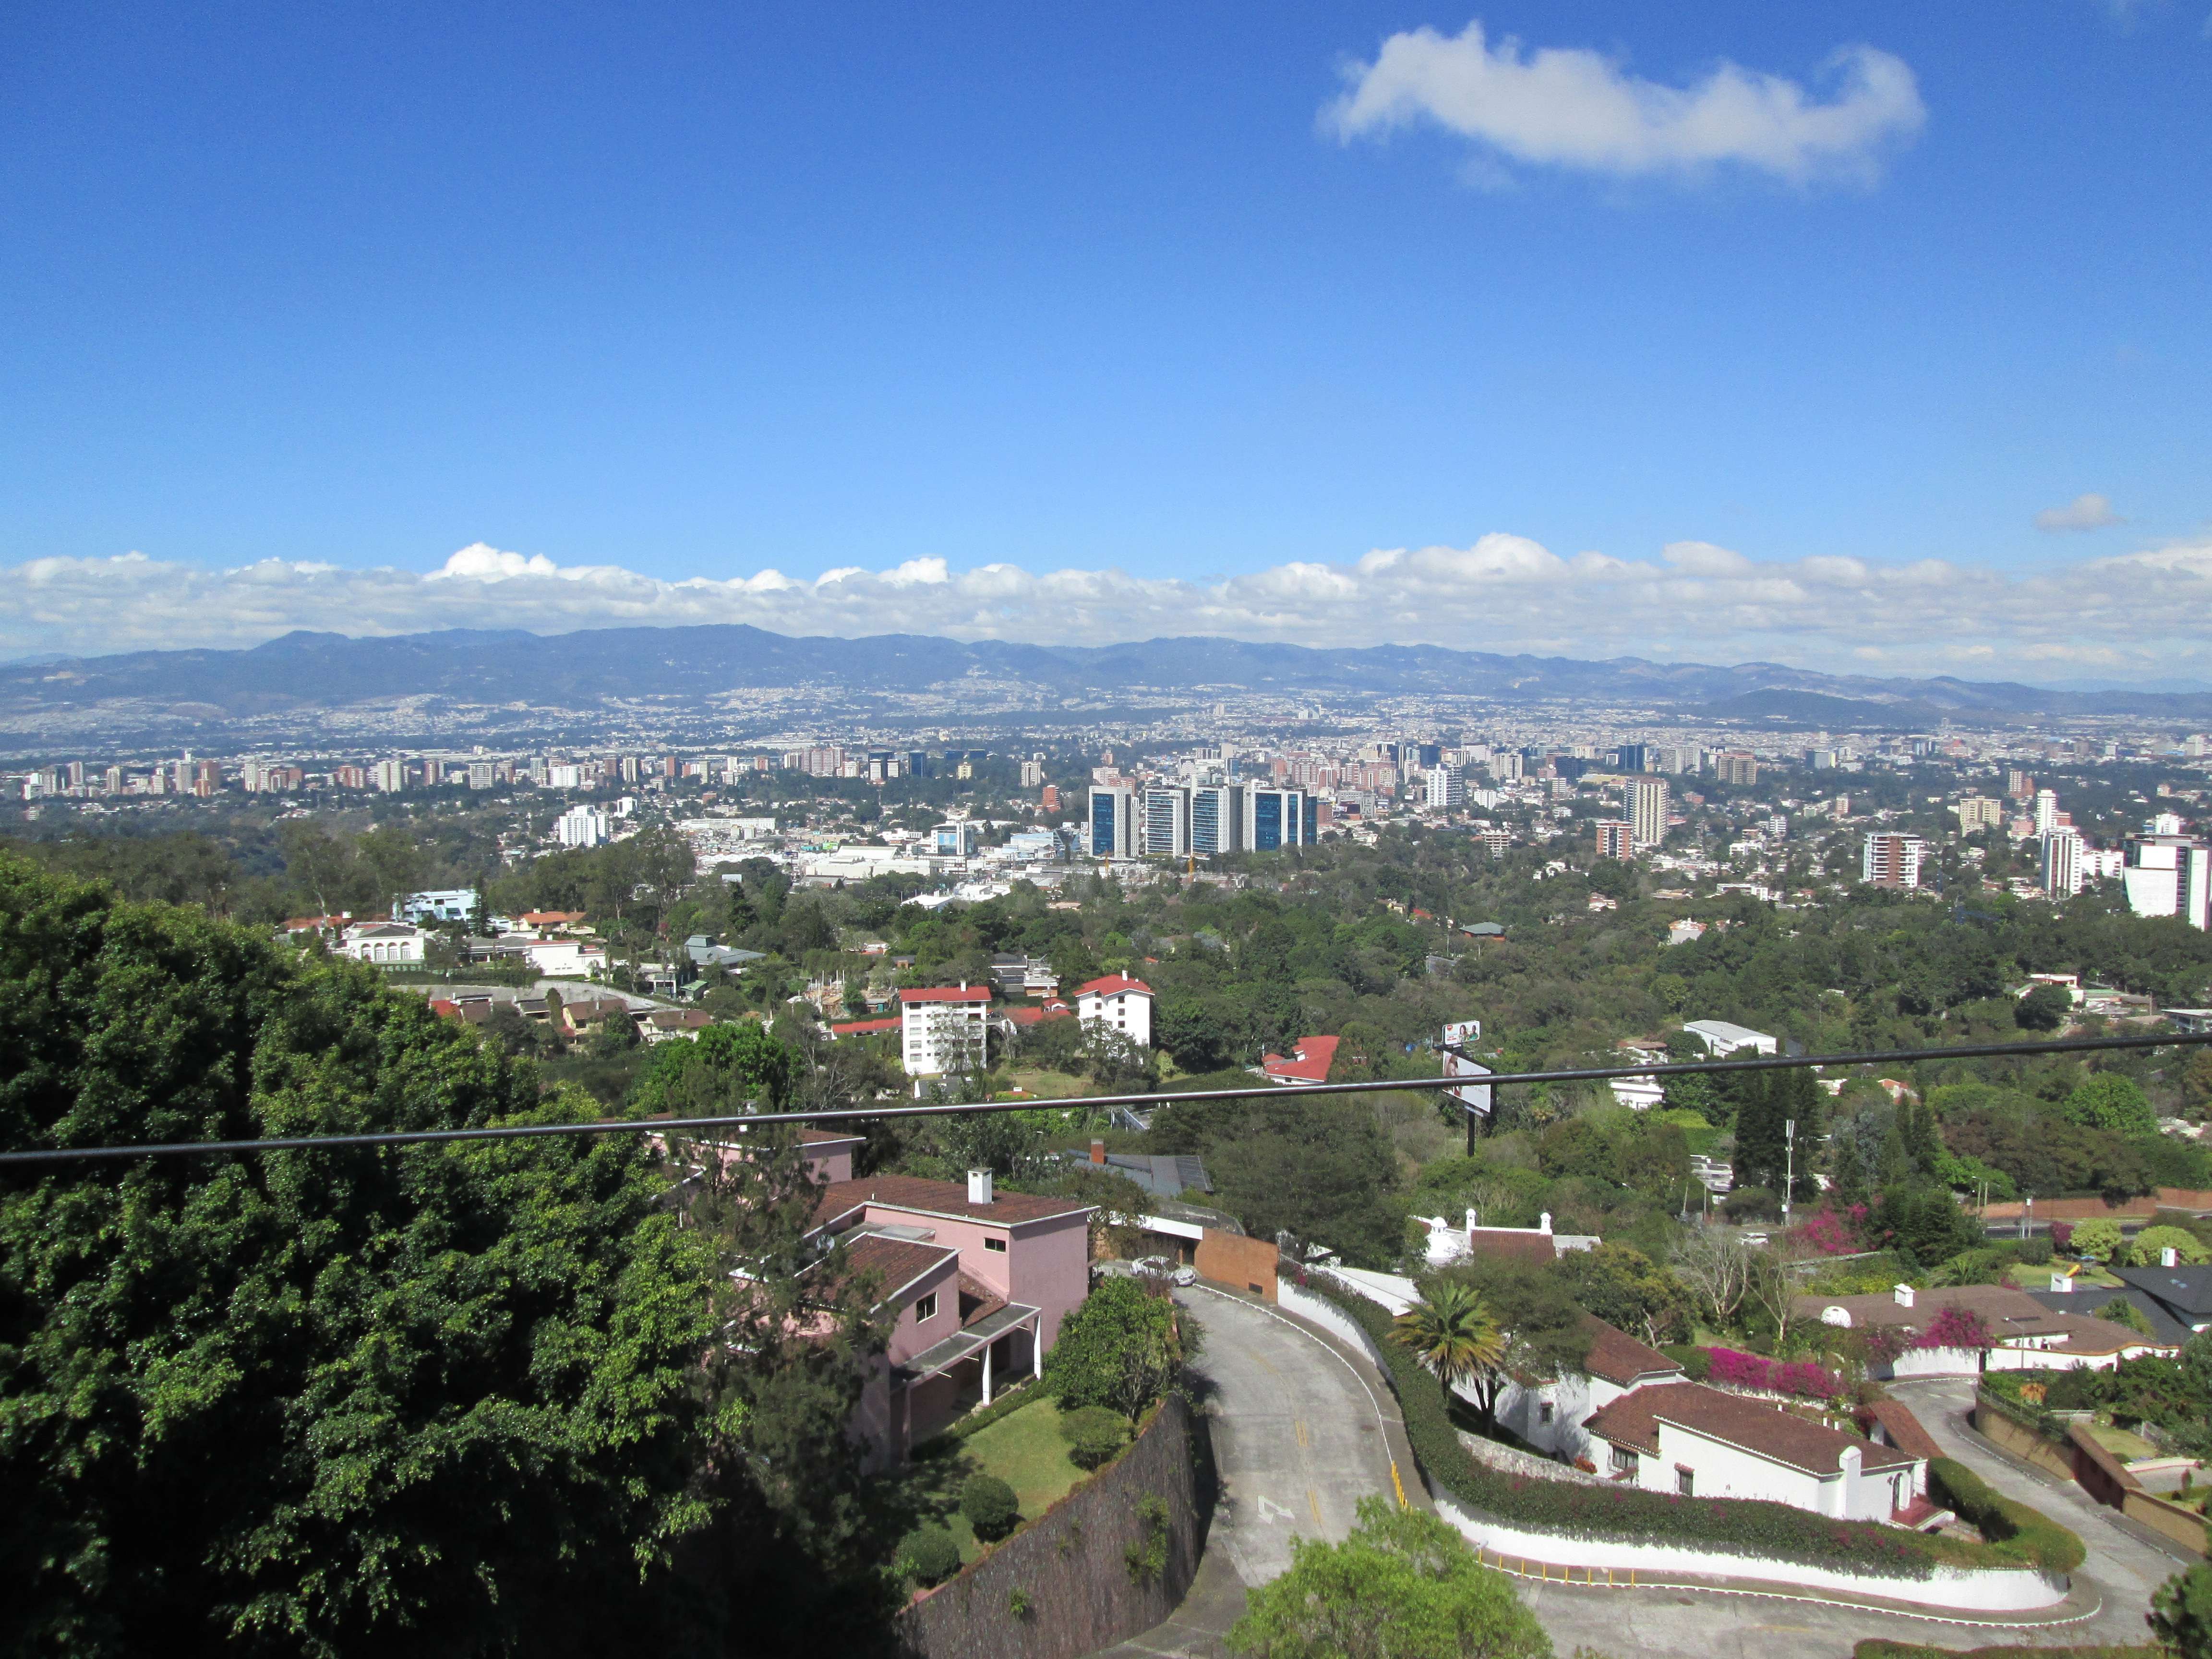 A shot of Guatemala City that I took as I walked out